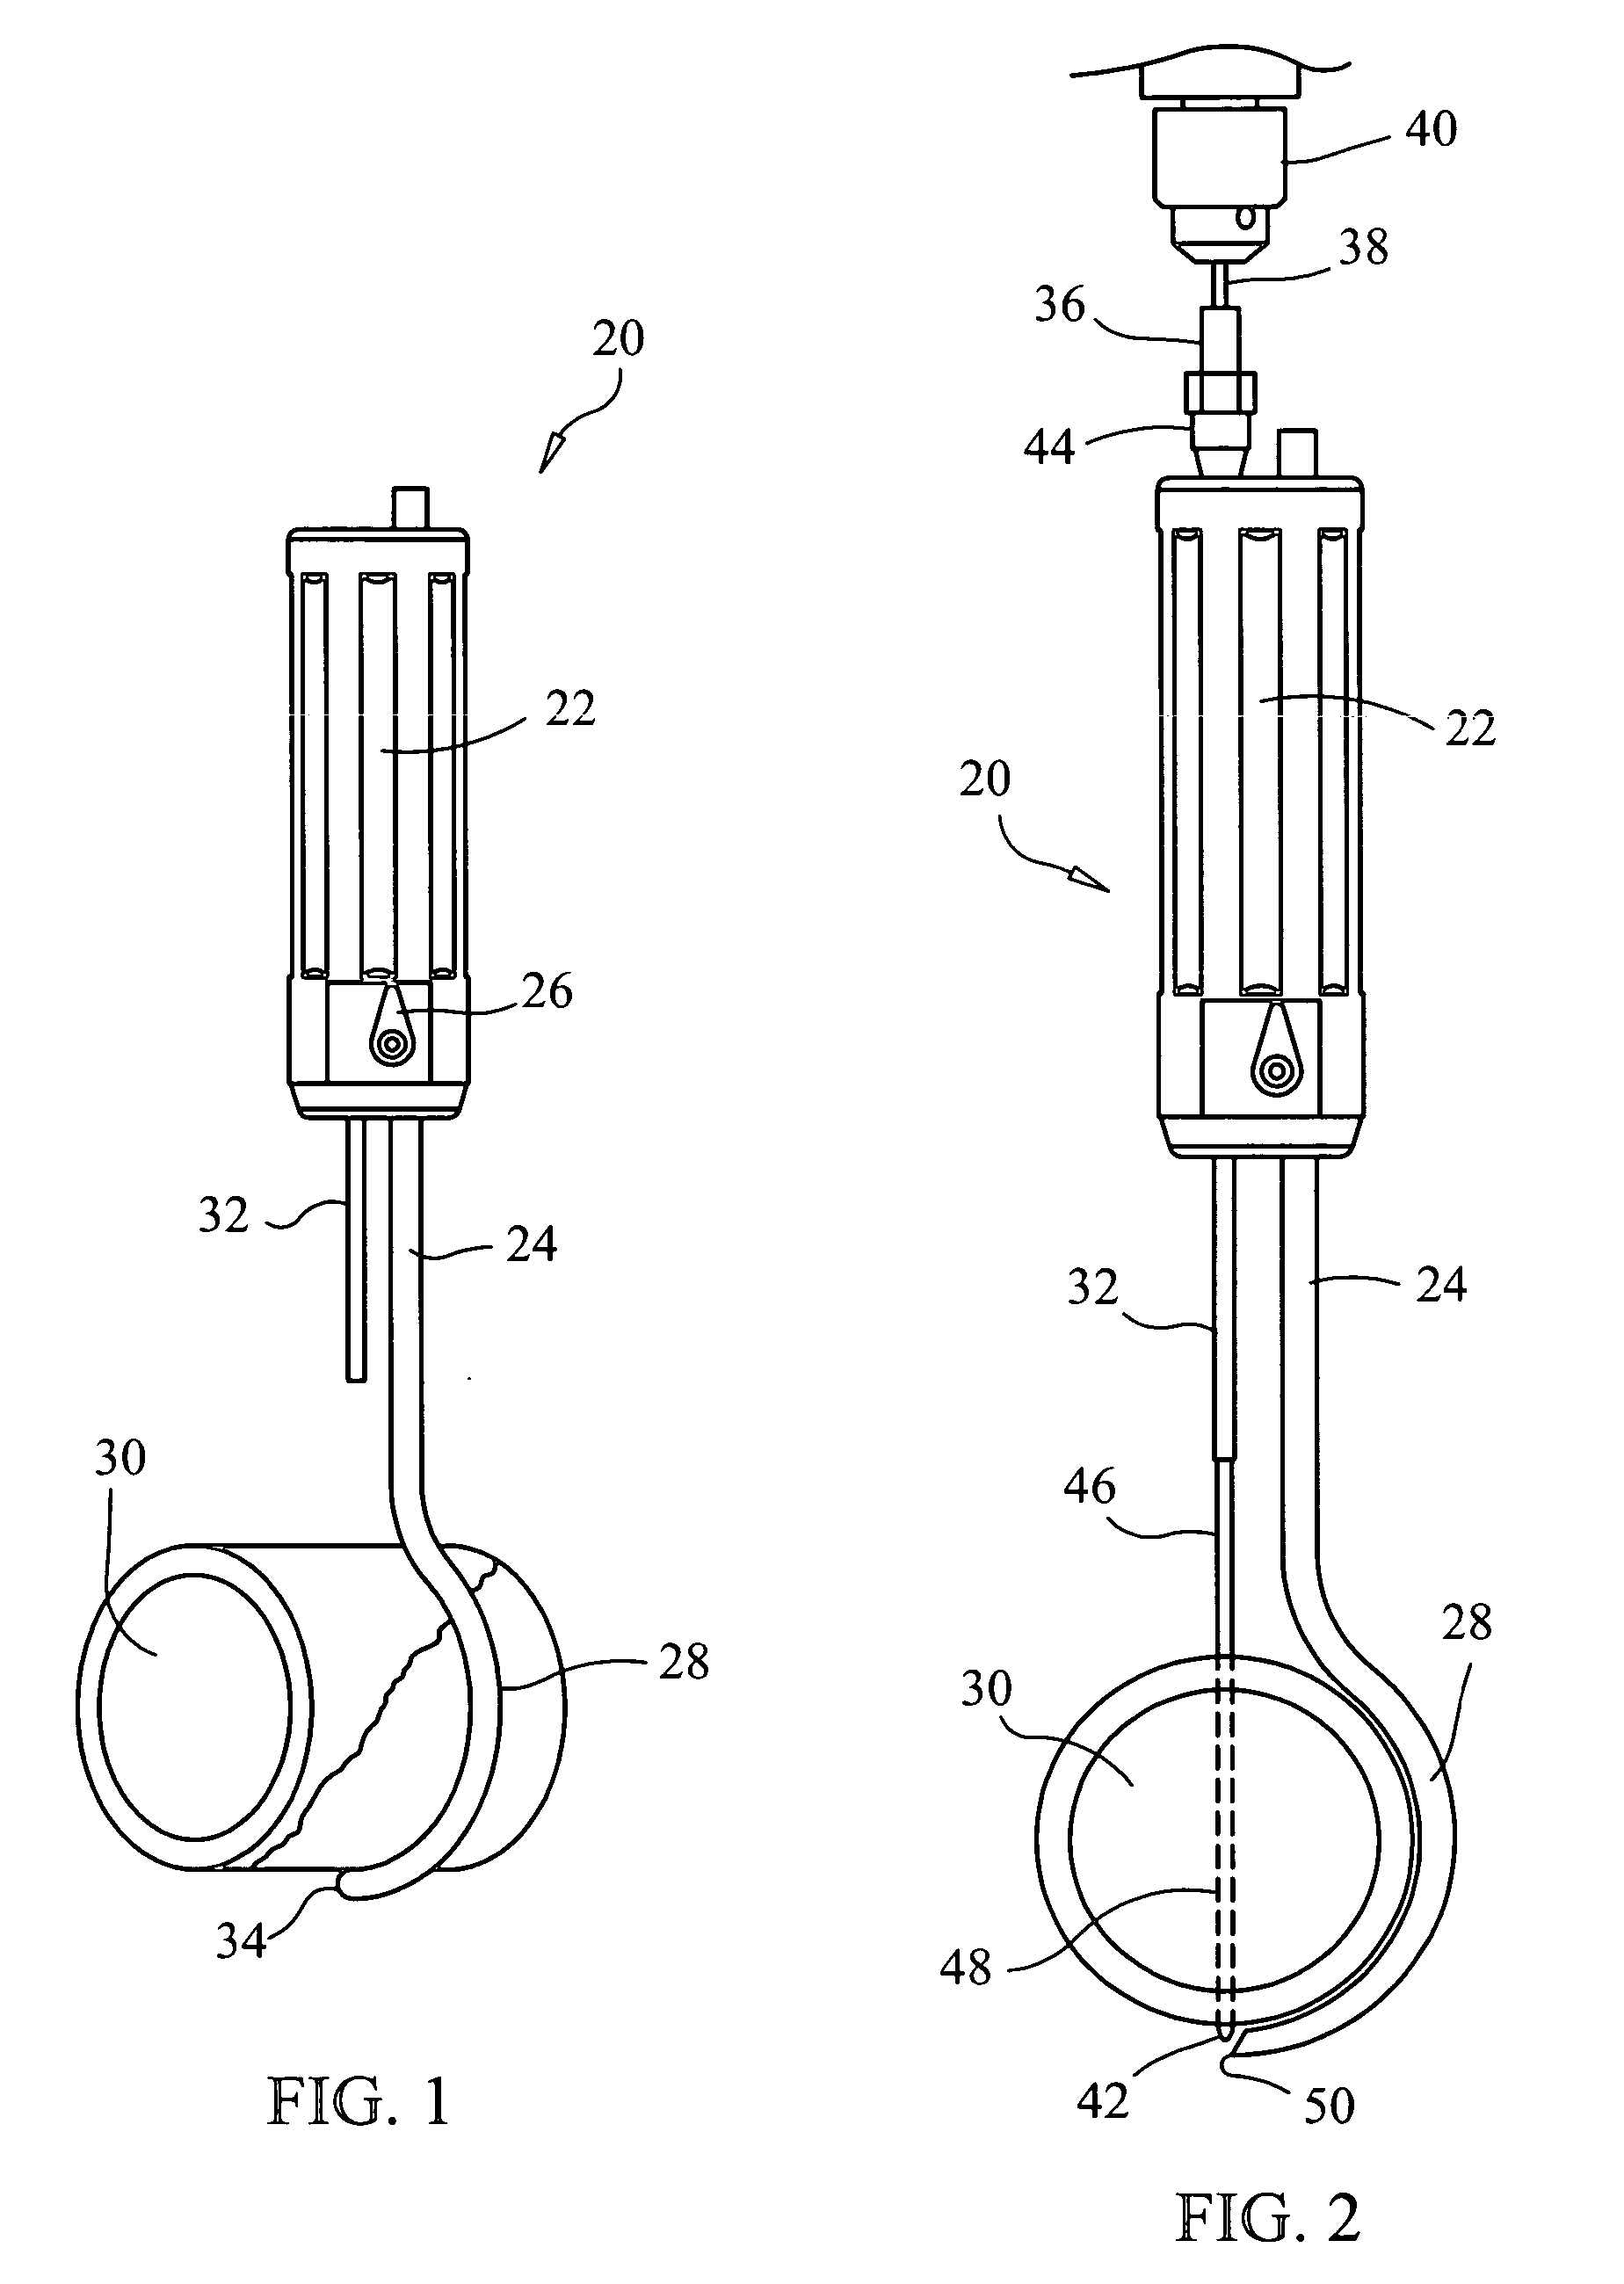 Apparatus and methods for surgery